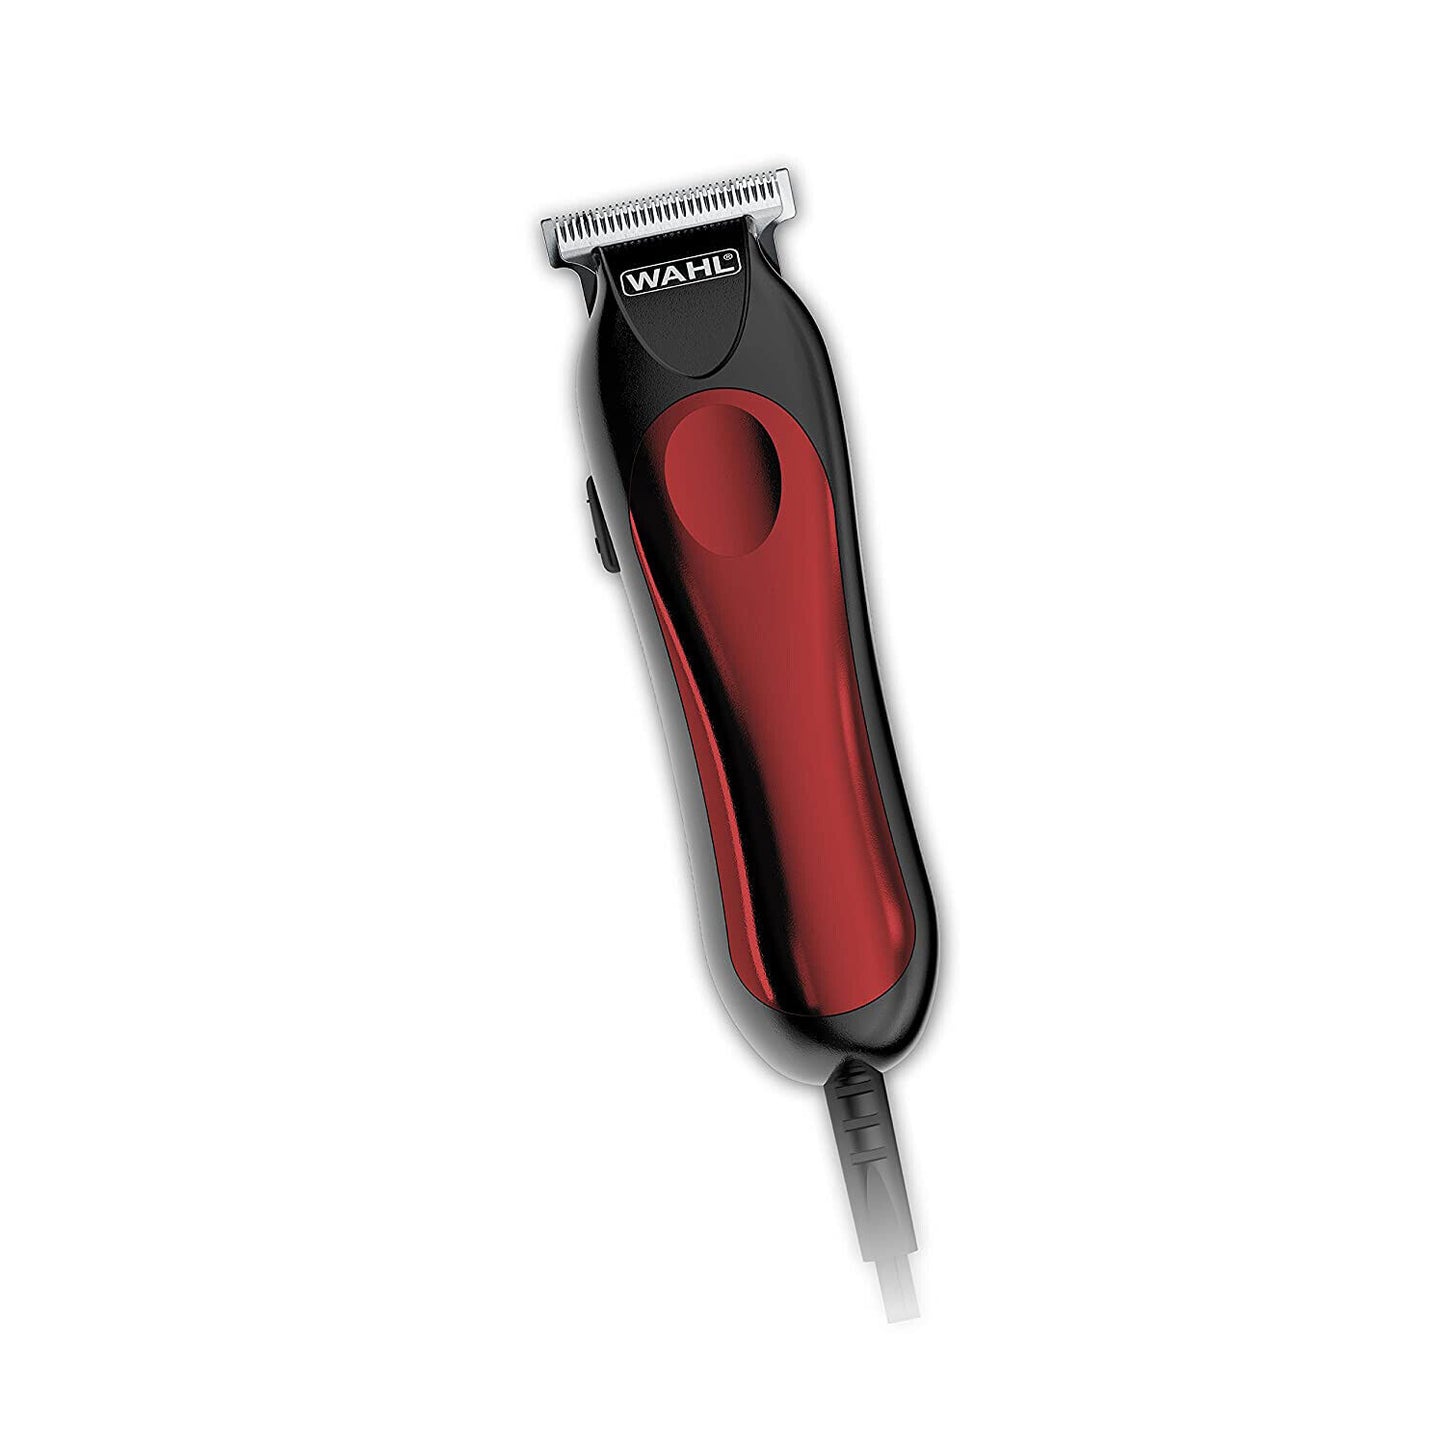 Wahl Hair Clippers Beard Mustache Professional Trimmer Barber Shaver T-Pro Liner